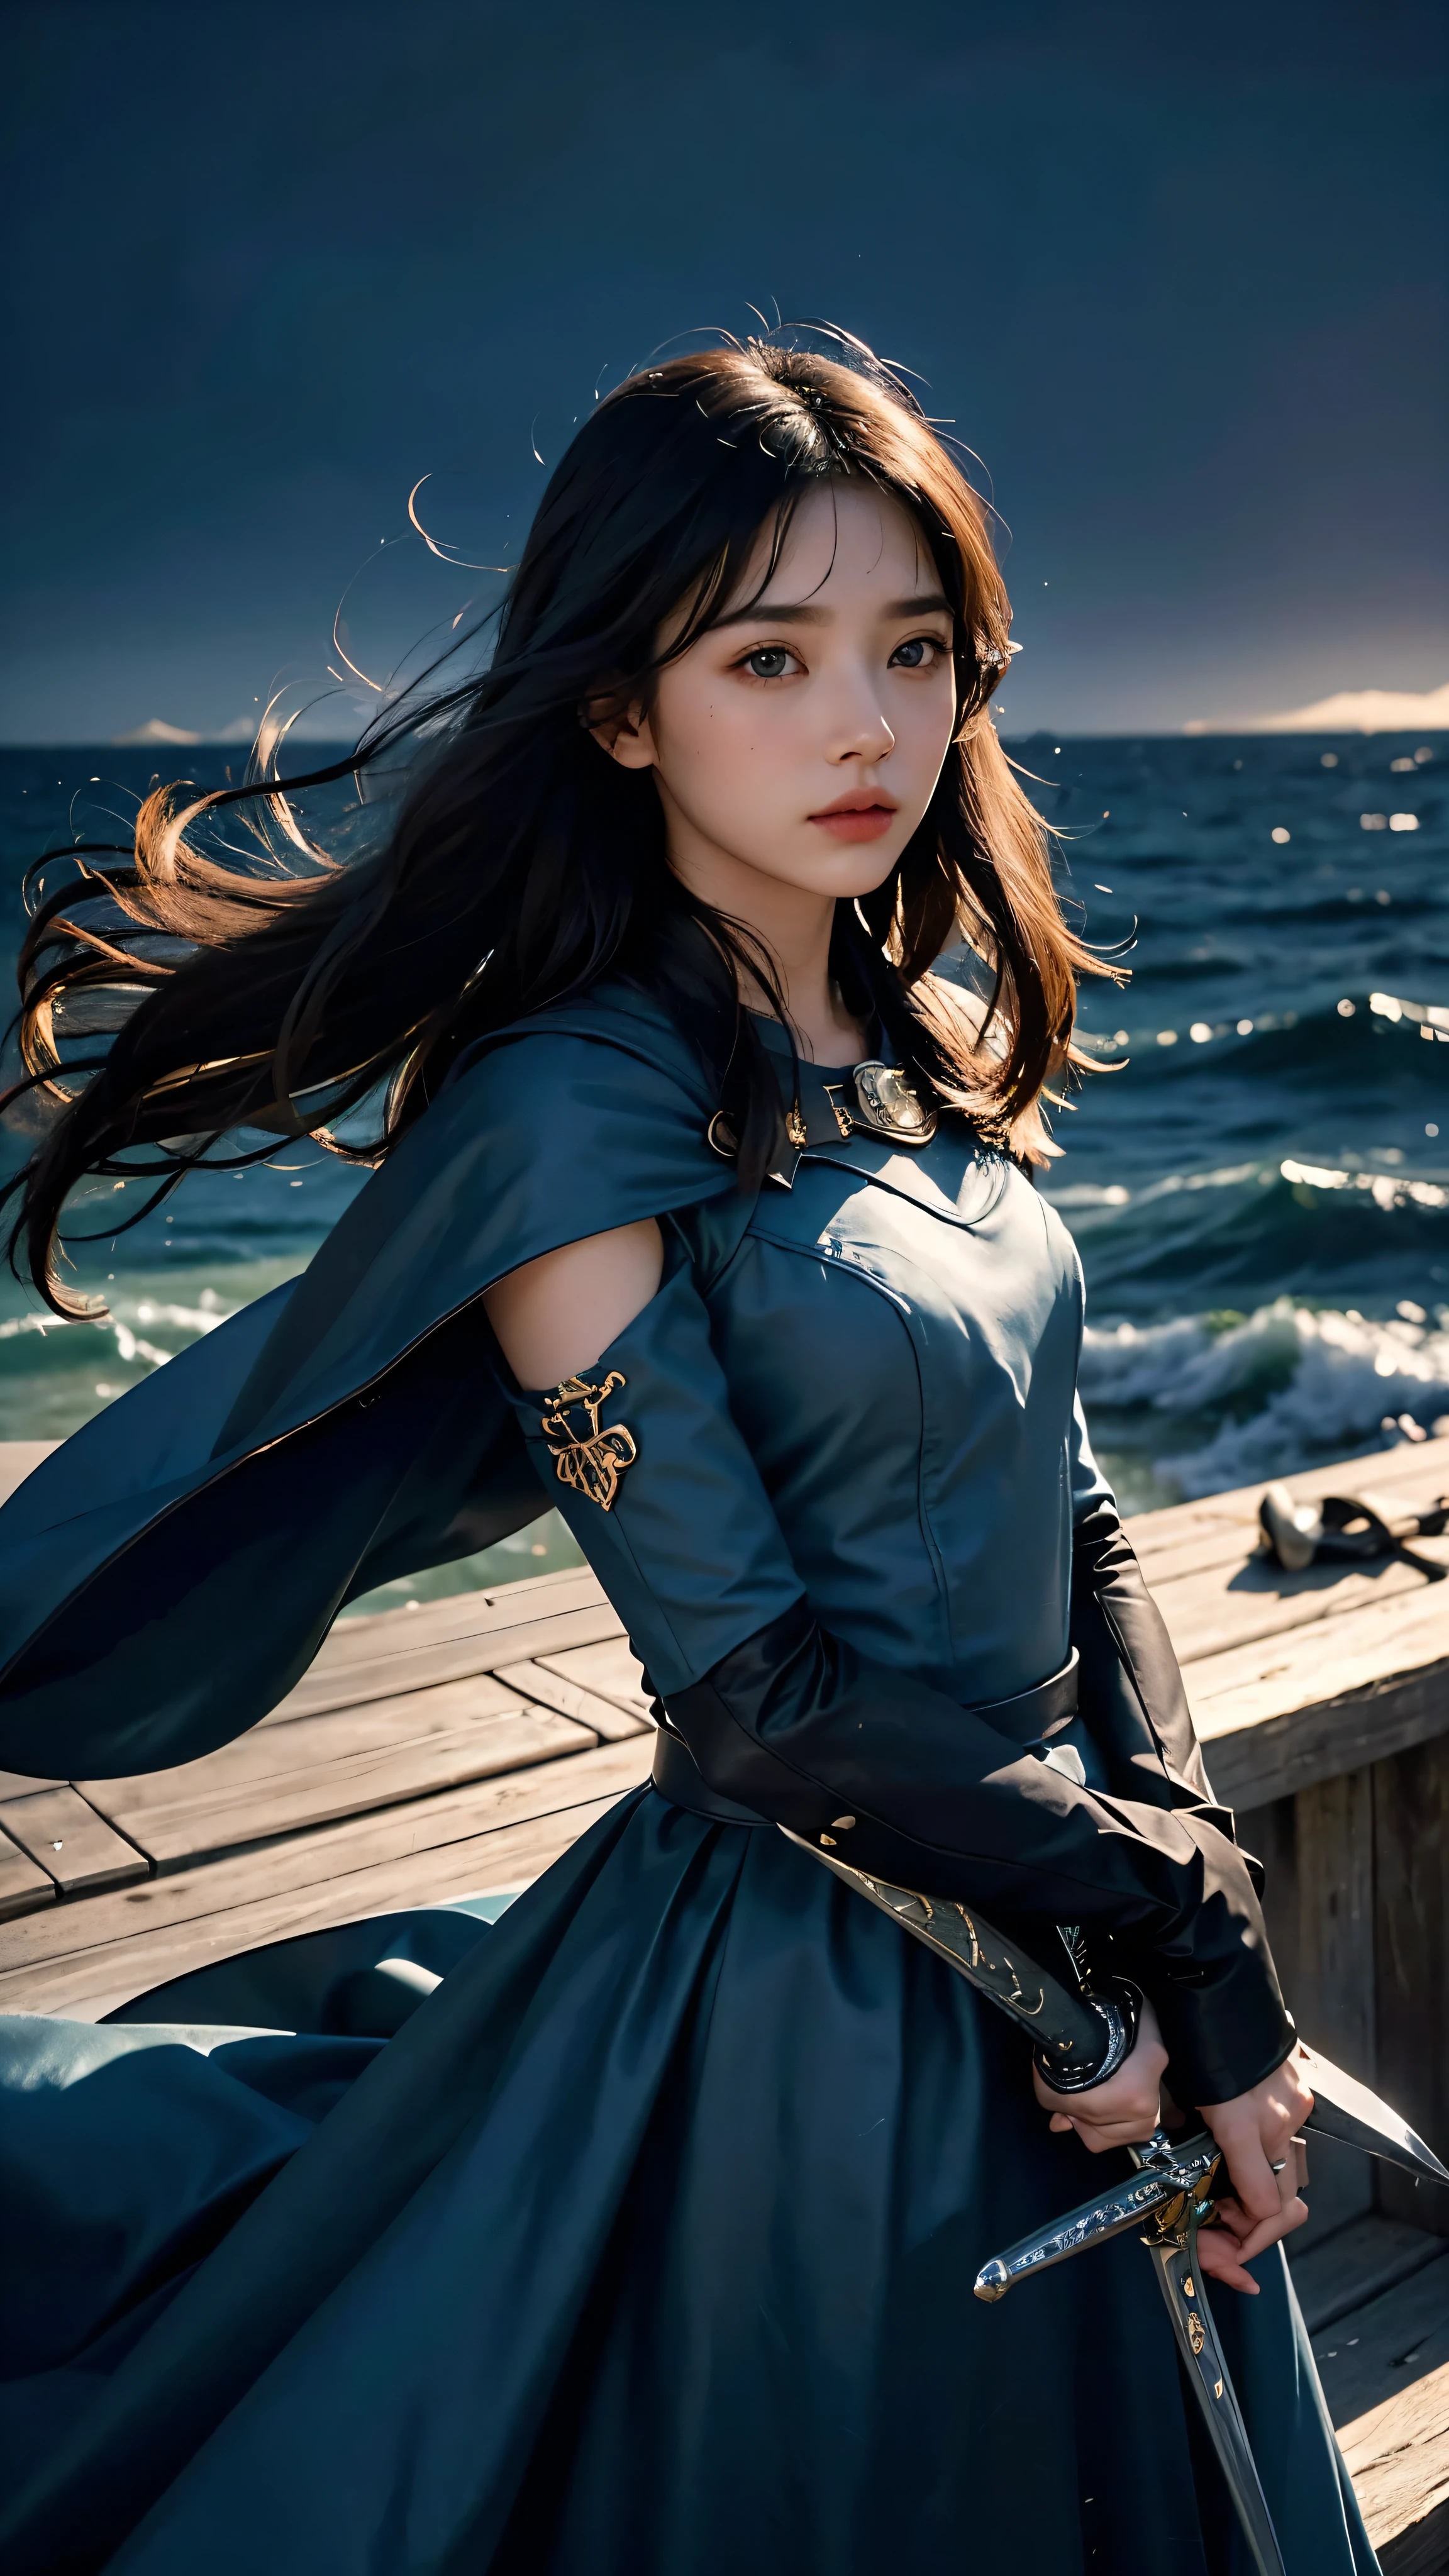 with high definition images，Young beautiful woman、Boat solo、Heroic Cape、、Highest quality、4K、HDR、Sea of stars、romantic、small、Sharp Focus、Super detailed、landscape、idealism、Large sword、dusk、High contrast、Dreamy atmosphere、Realistic、Black Hair、Piercing blue eyes、Stoic expression、Device、far away、Bokeh、Dramatically illuminated、Enchanting。